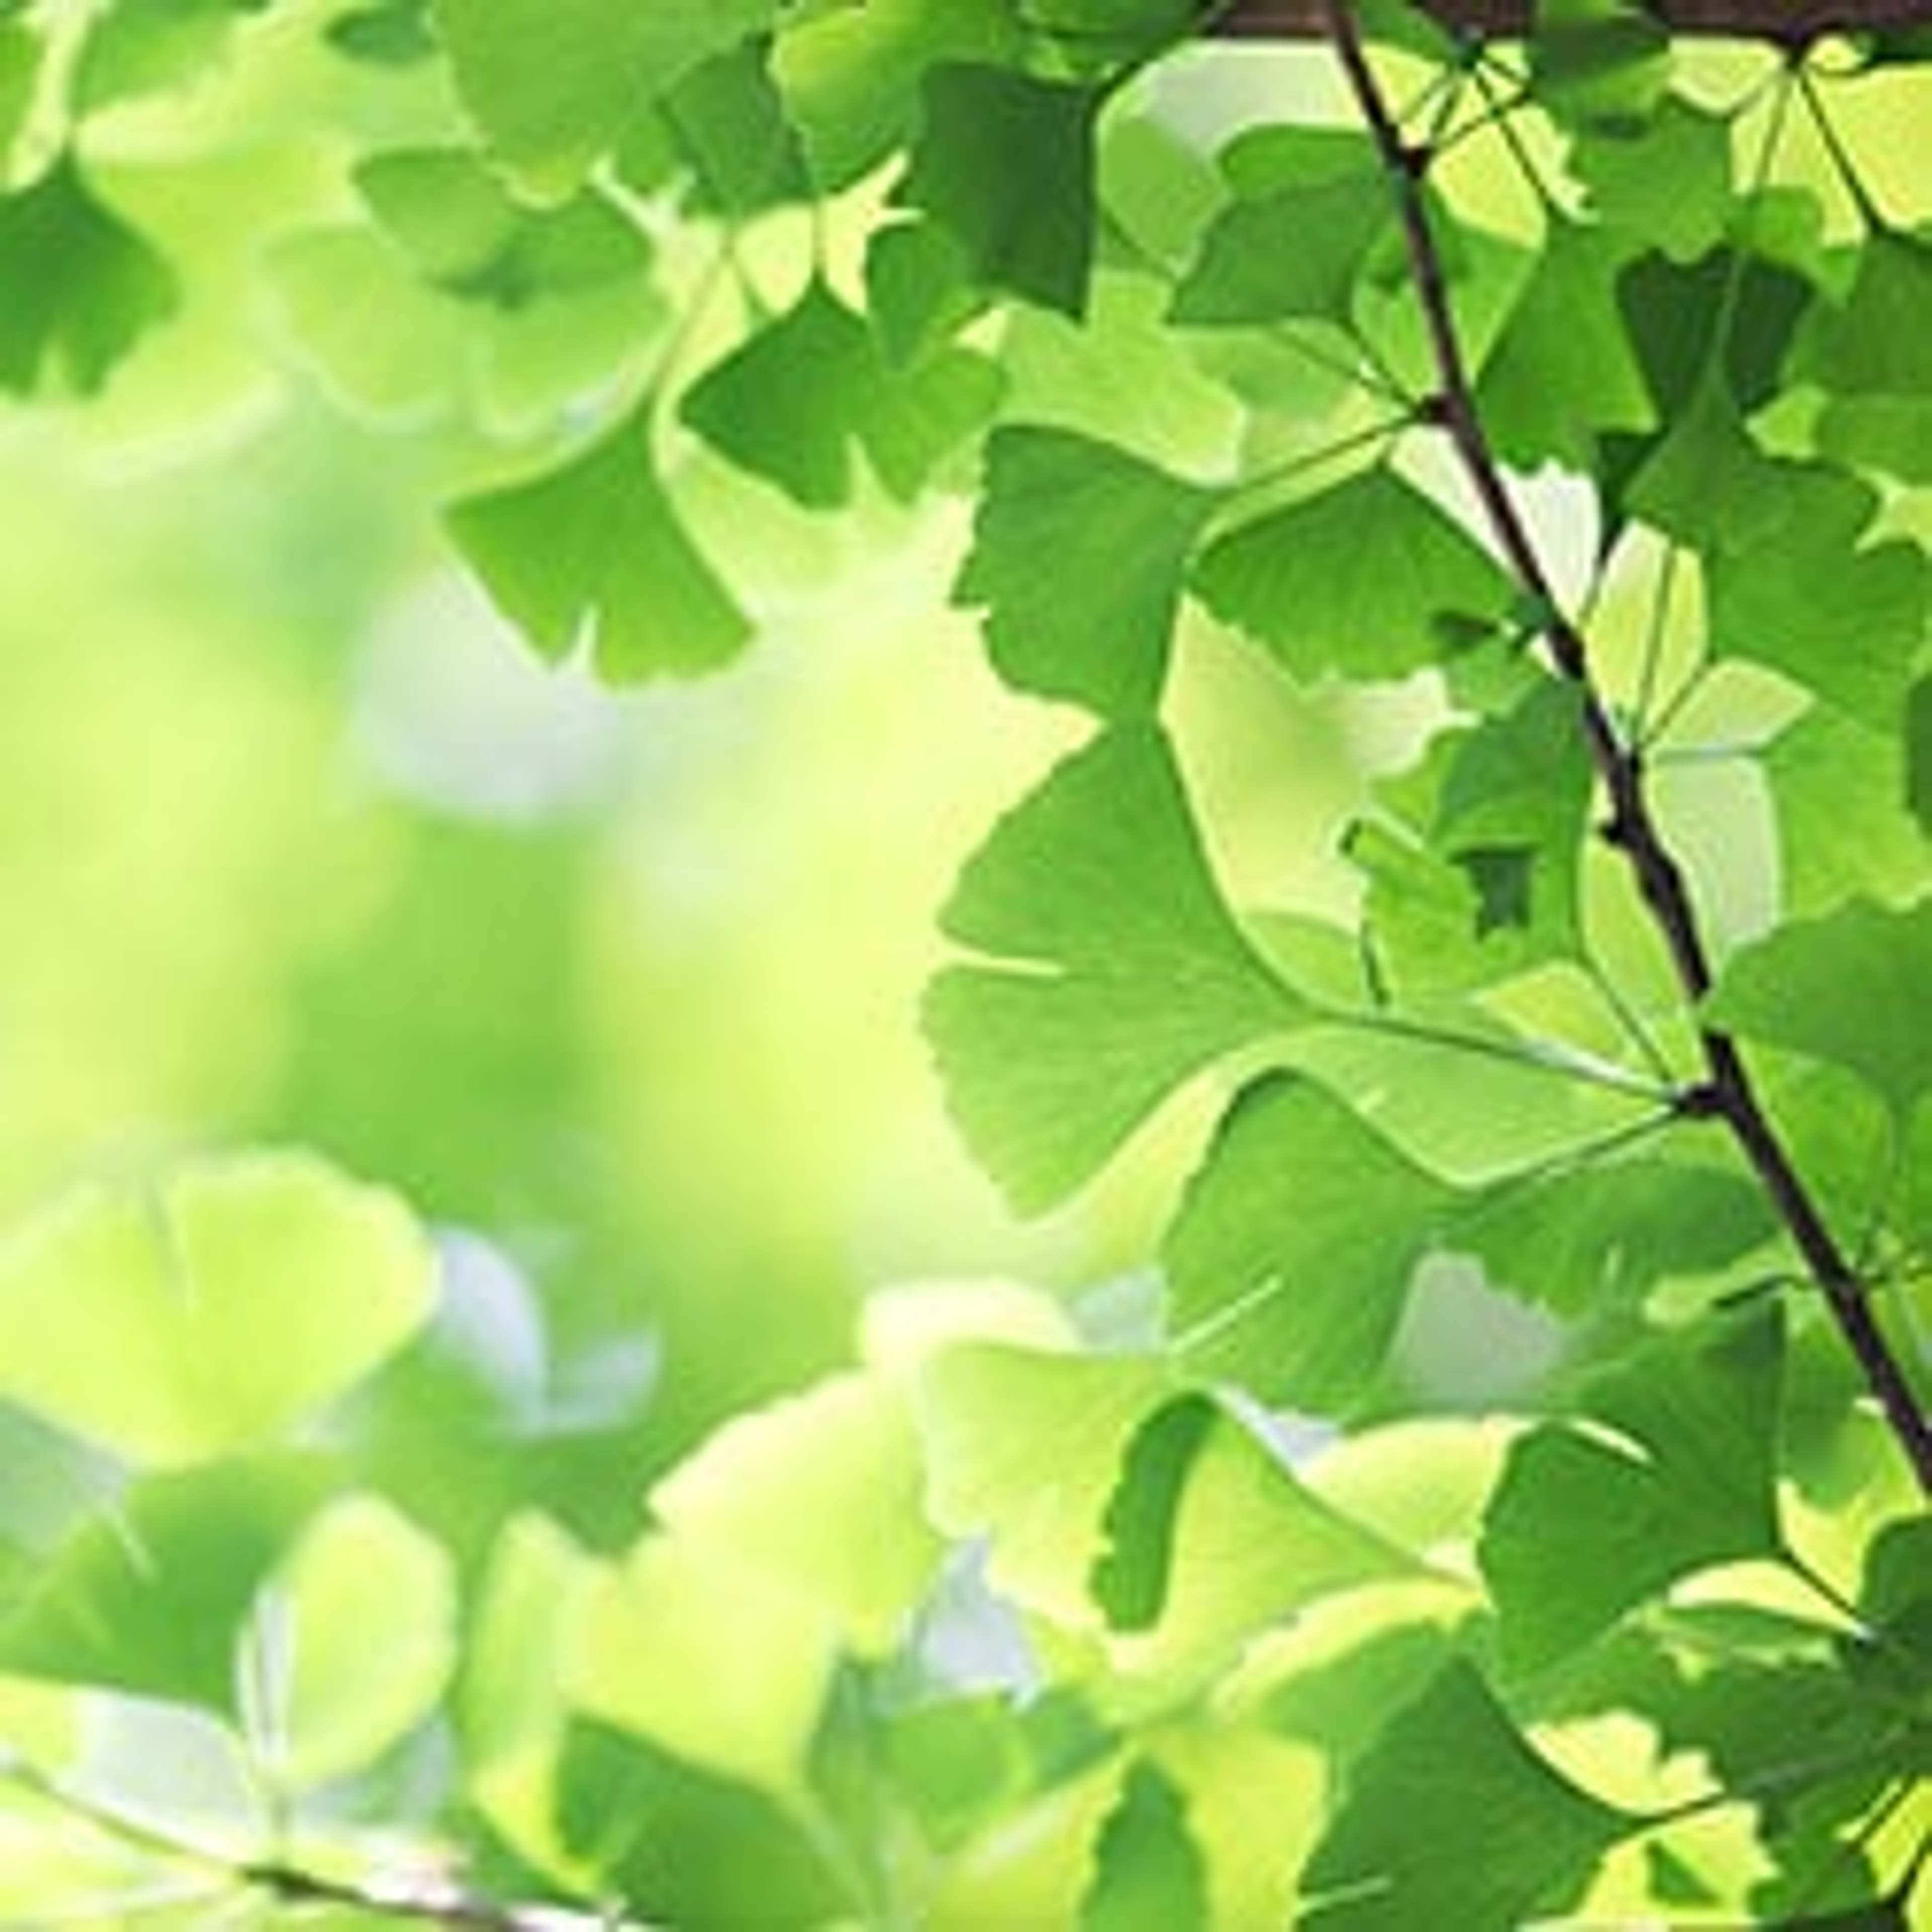 Ginkgo biloba is a medicinal supplement that is said to help improve the cognitive functions in patients suffering from the effects of Dementia and Alzheimer's disease.